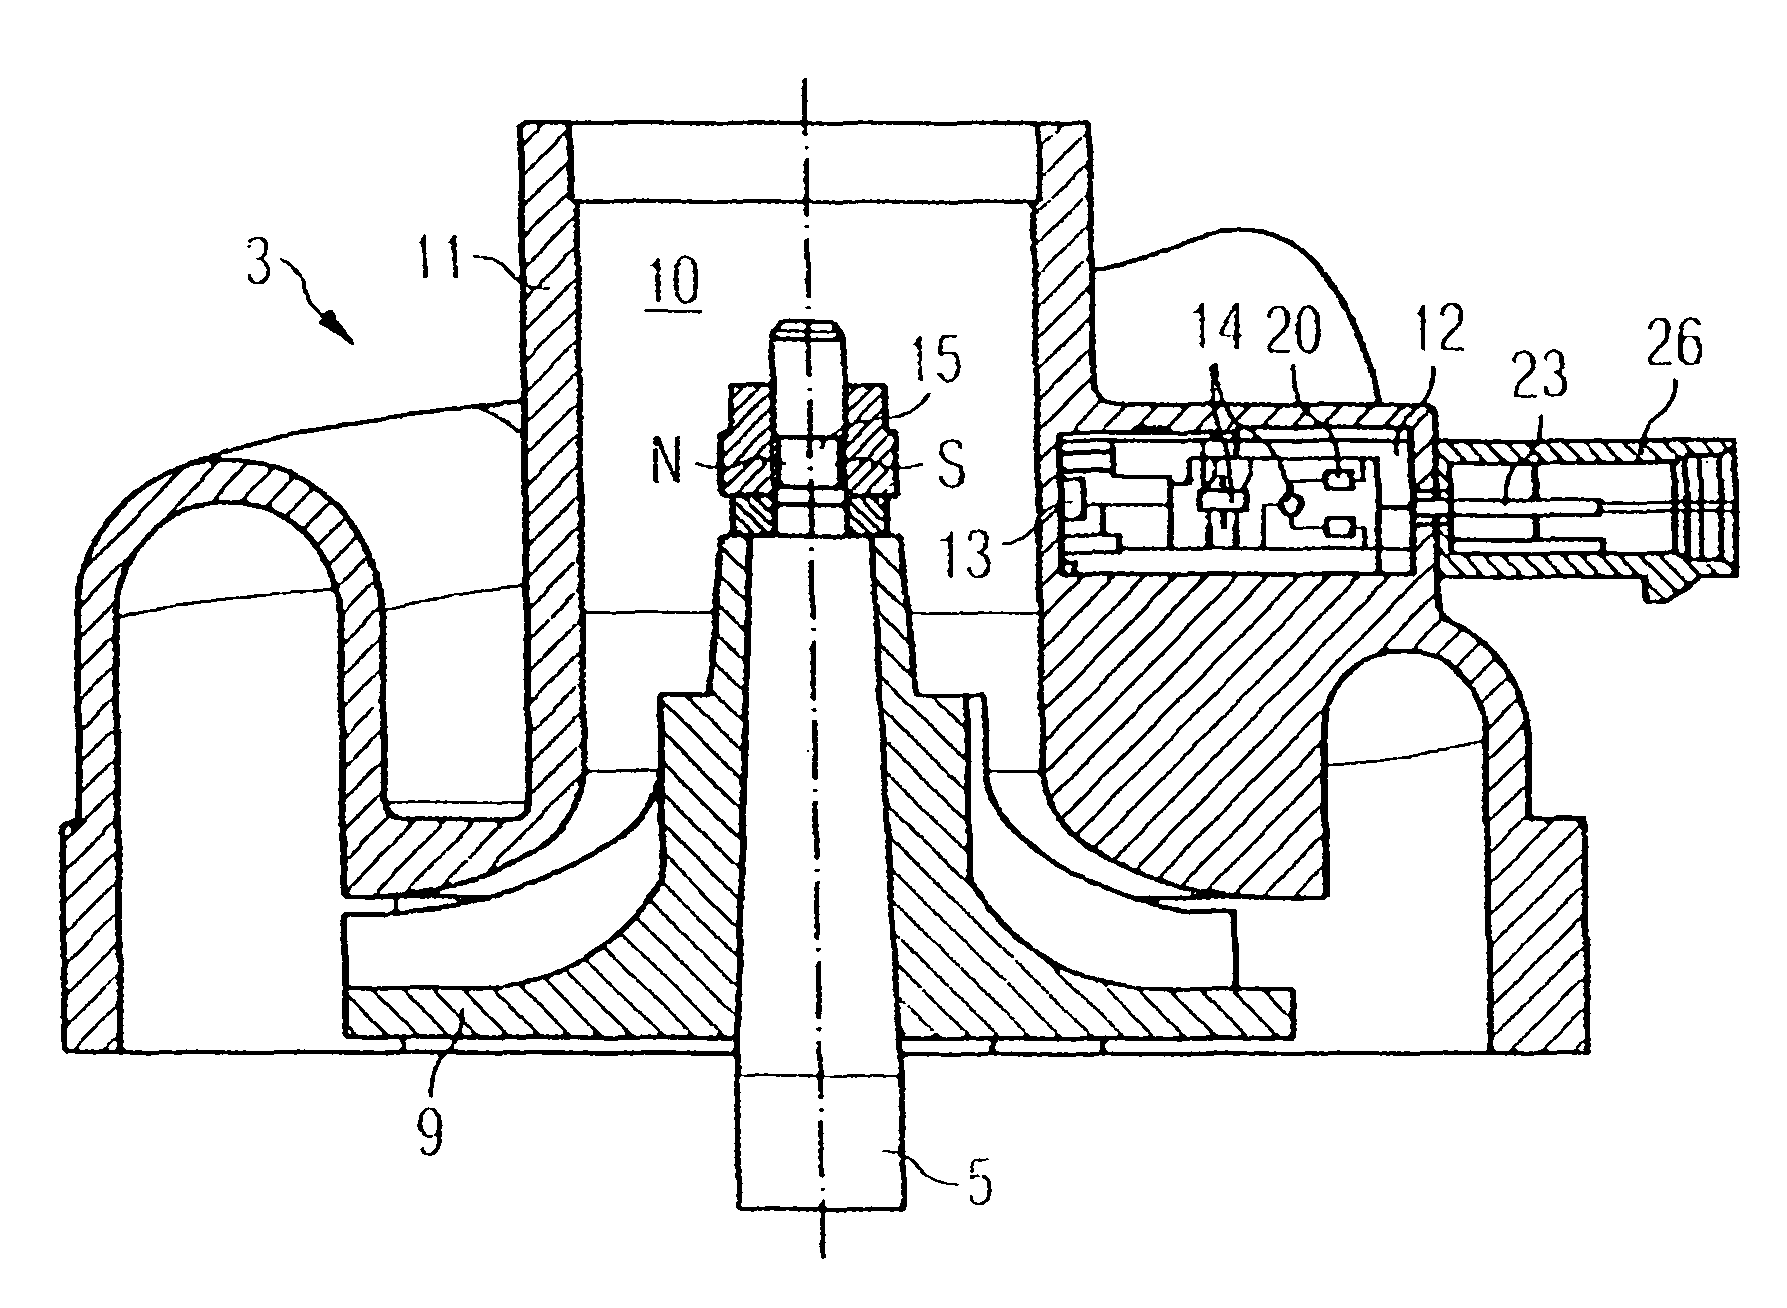 Compressor casing for an exhaust gas turbocharger